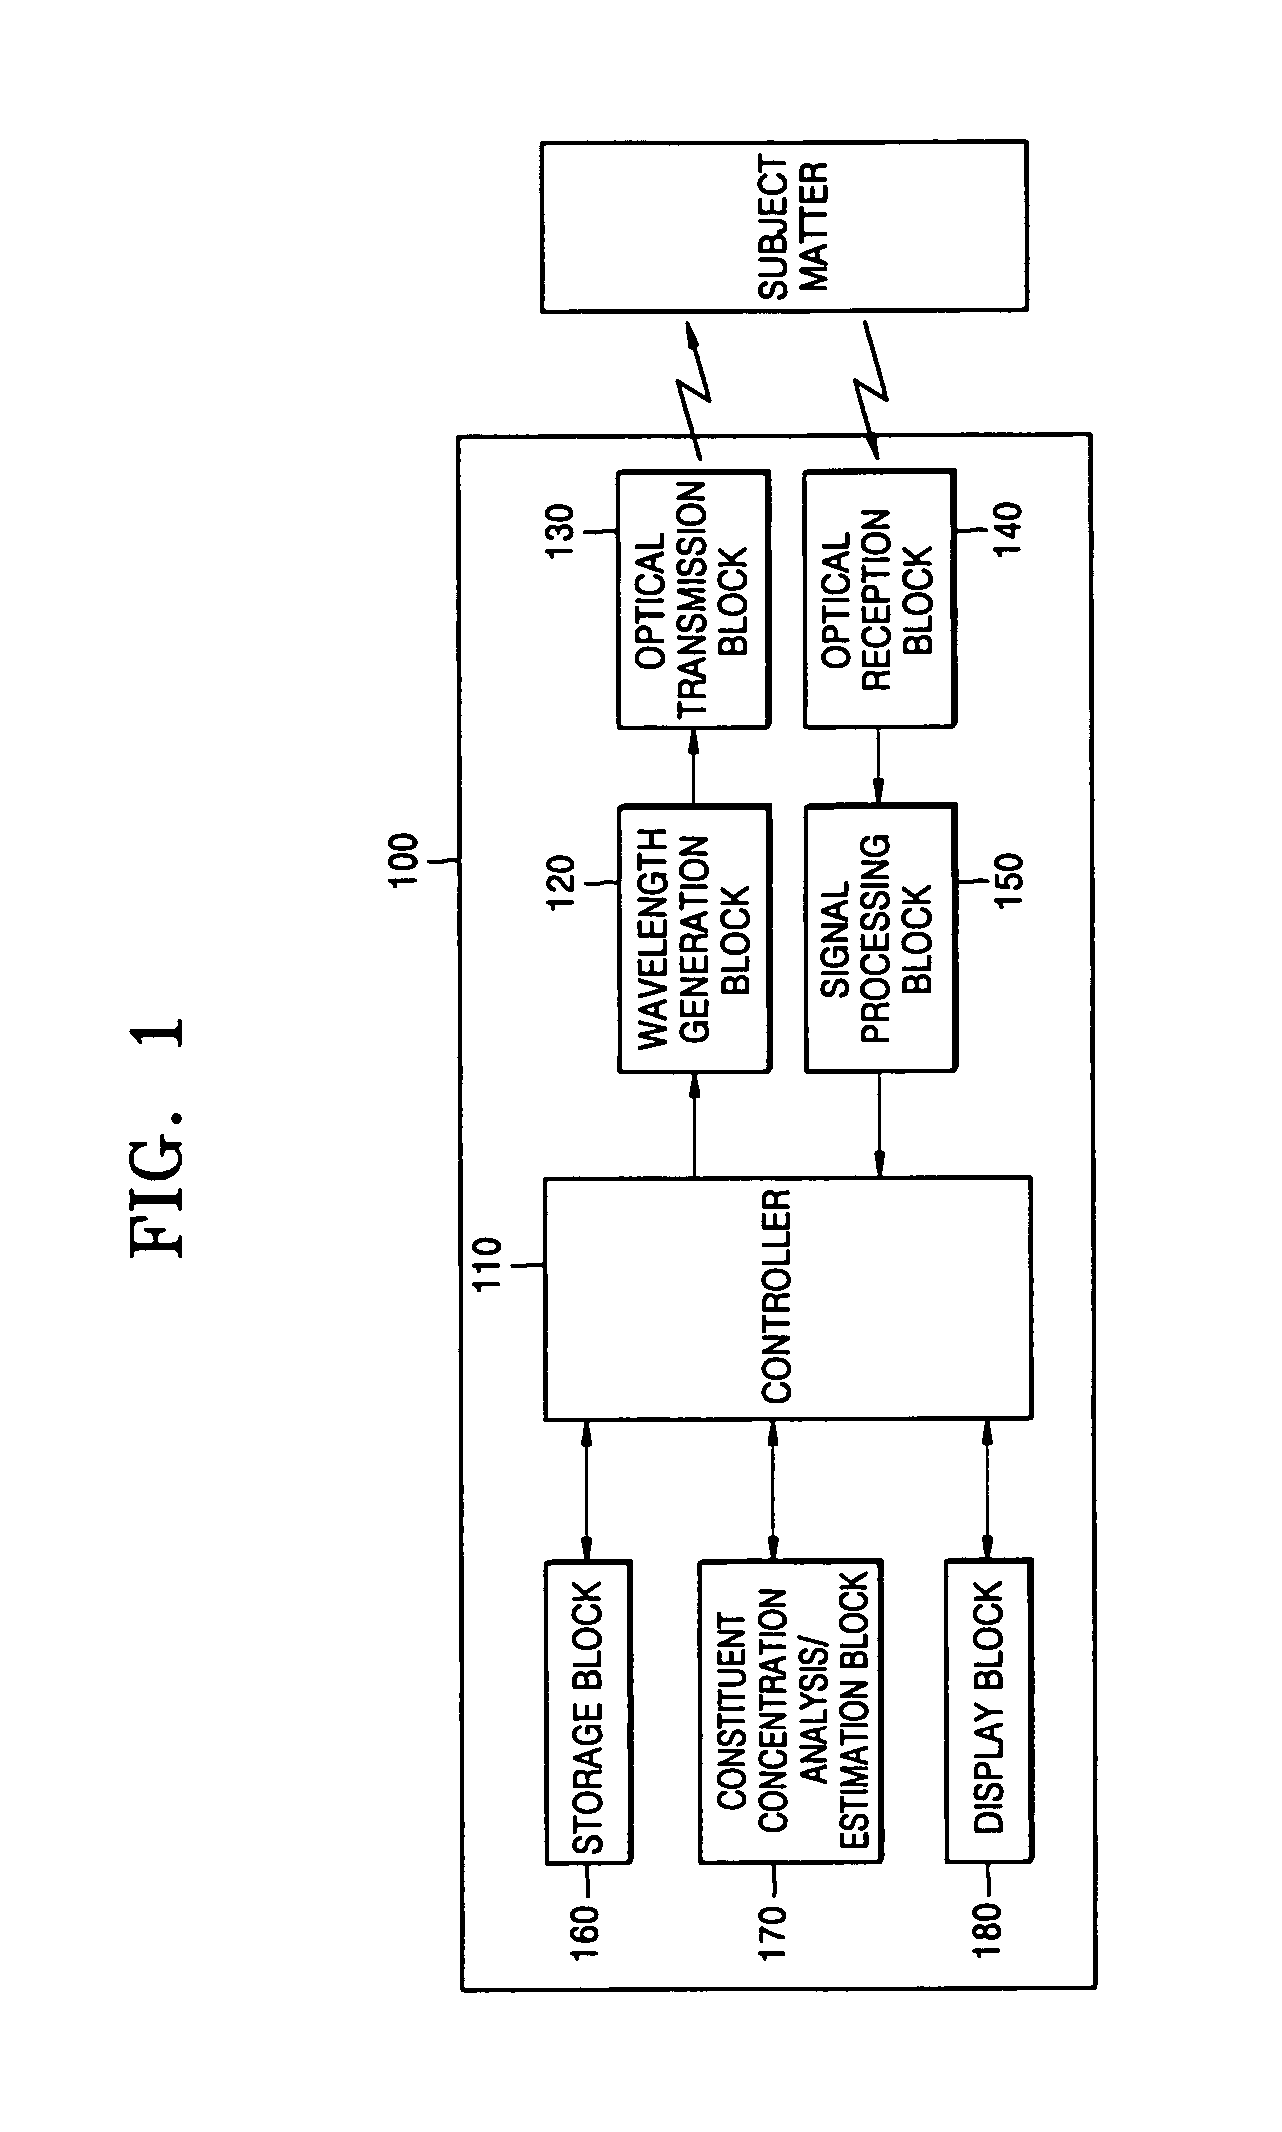 Variable wavelength generating method and apparatus thereof, for use in measuring body fluids constituent concentration